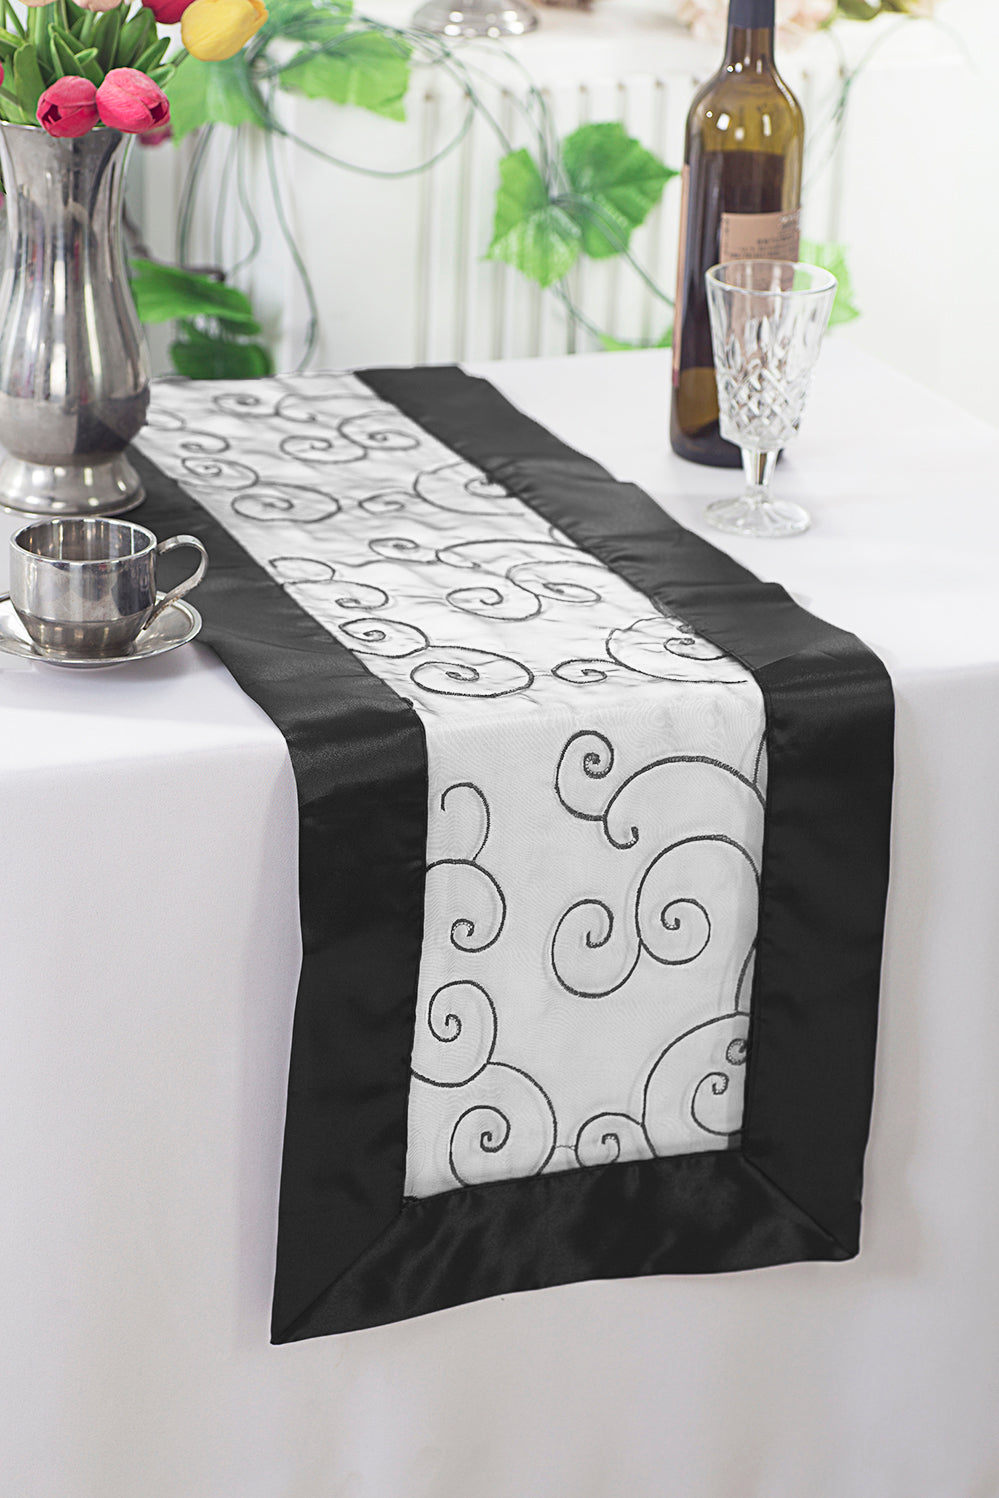 12.75"x108" Embroidered Organza Table Runner - White/Black (1pc)